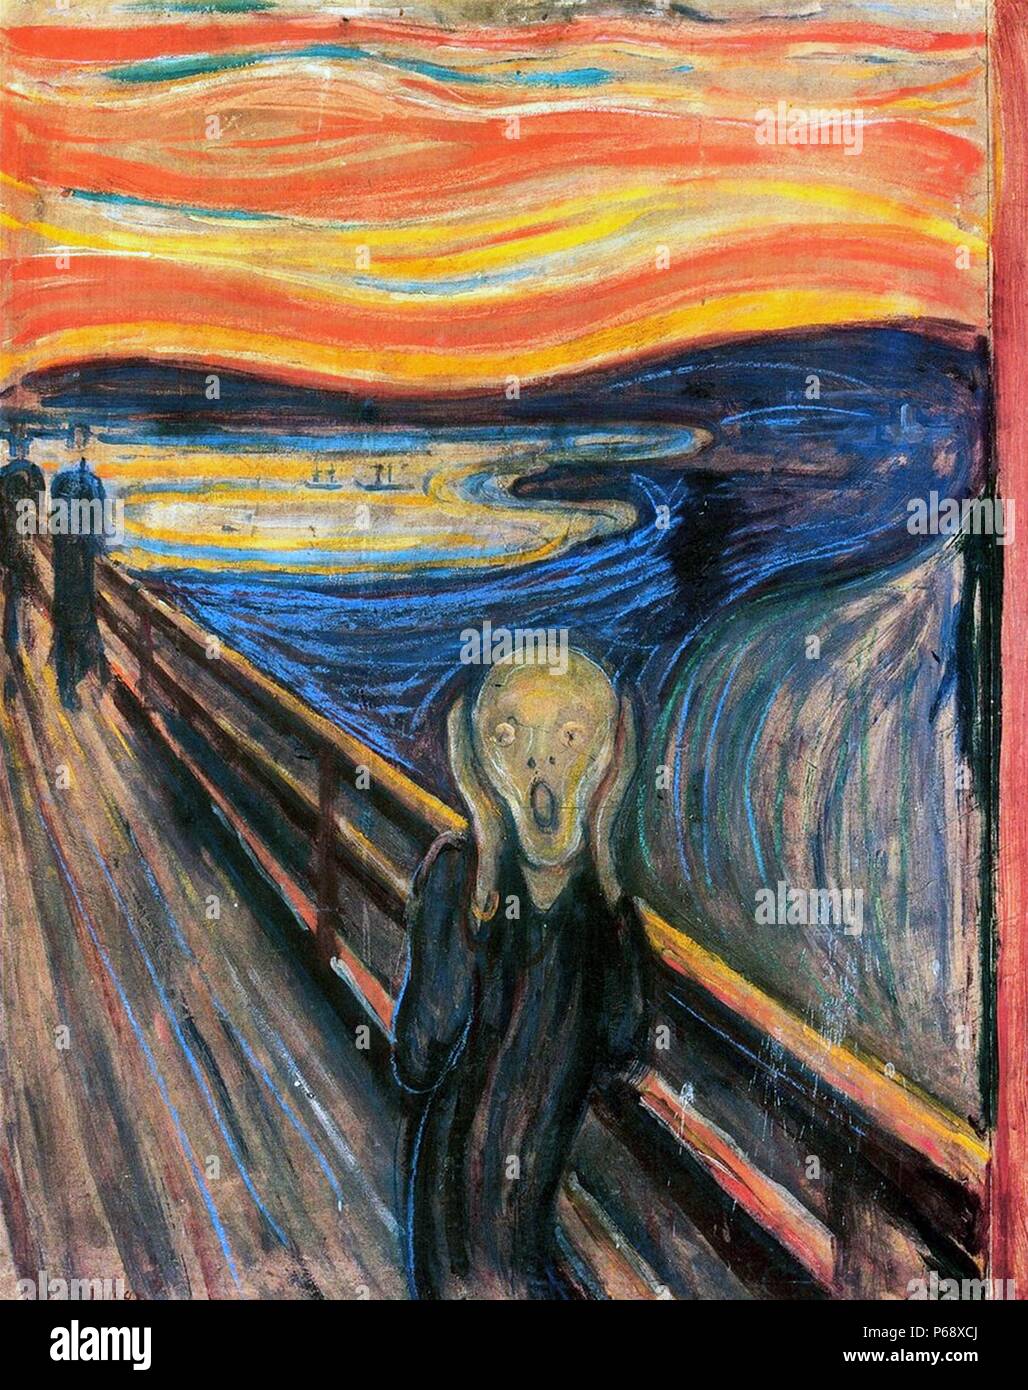 One of several versions of the painting 'The Scream' by the Norwegian artist Edvard Munch (1864-1944). This work was produced c 1893. Stock Photo